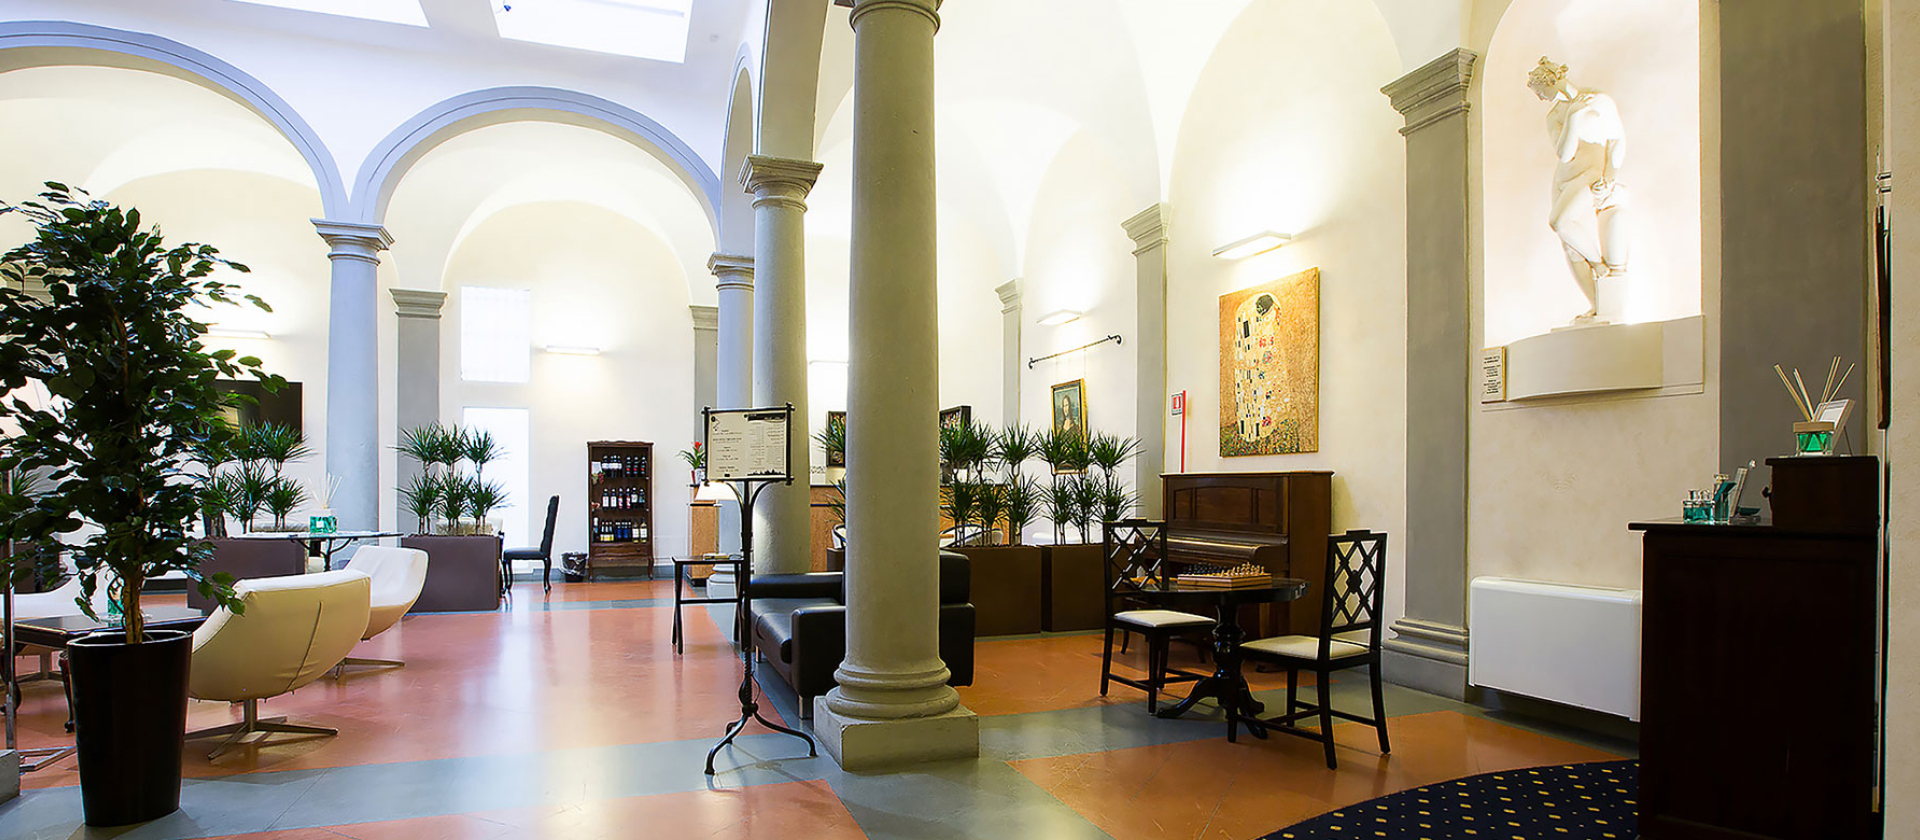 15 61 Hotel Centrale Firenze Hall